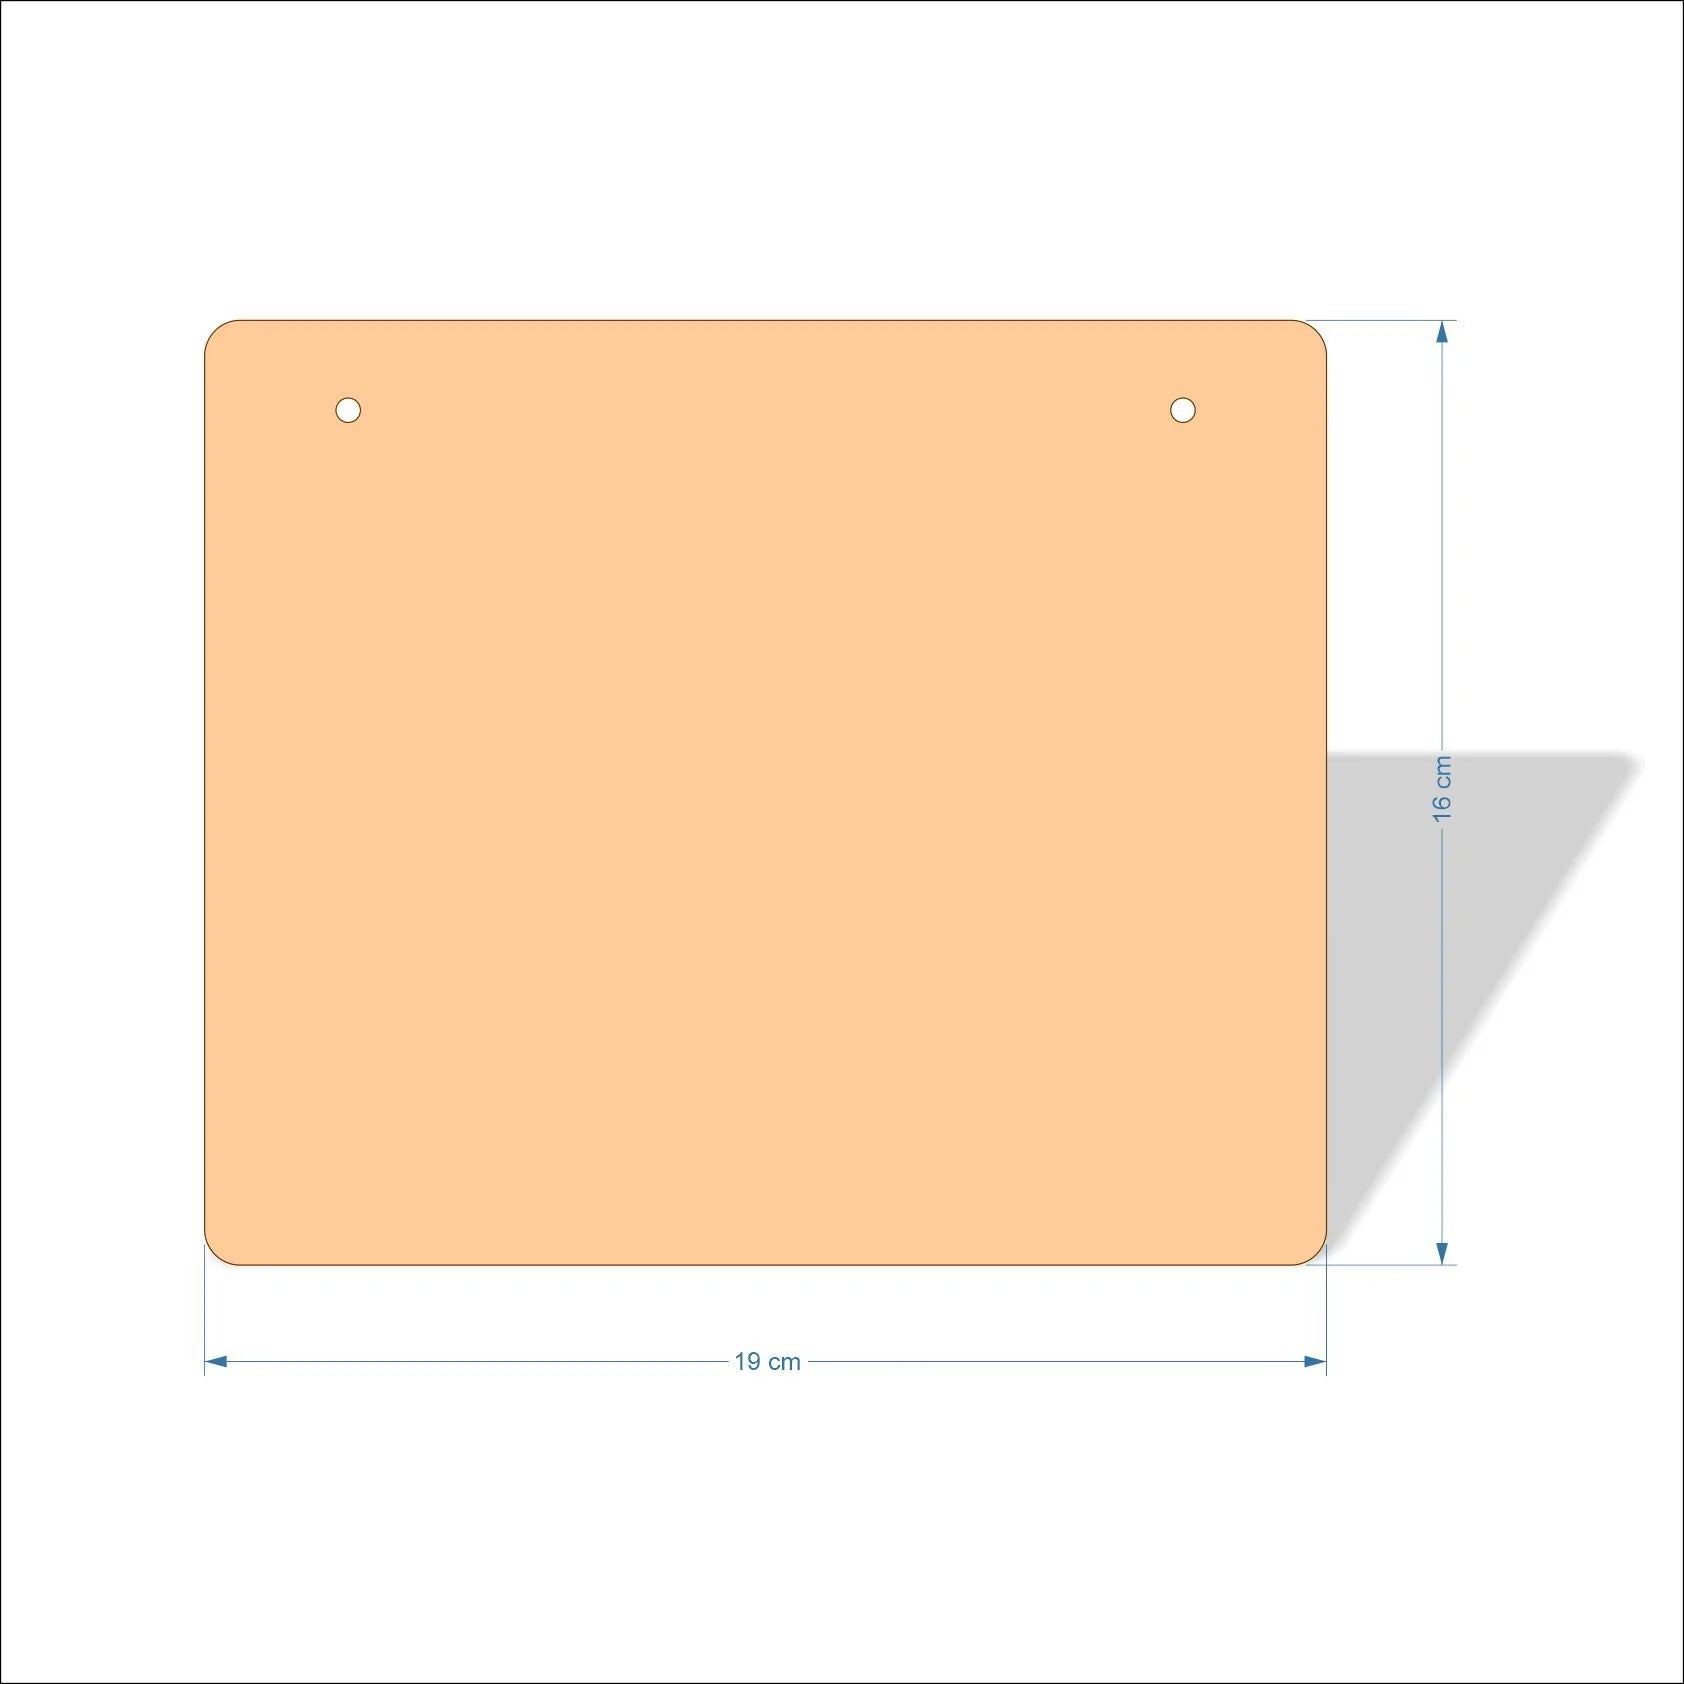 19 cm X 16 cm 4mm poplar plywood Plaques with rounded corners